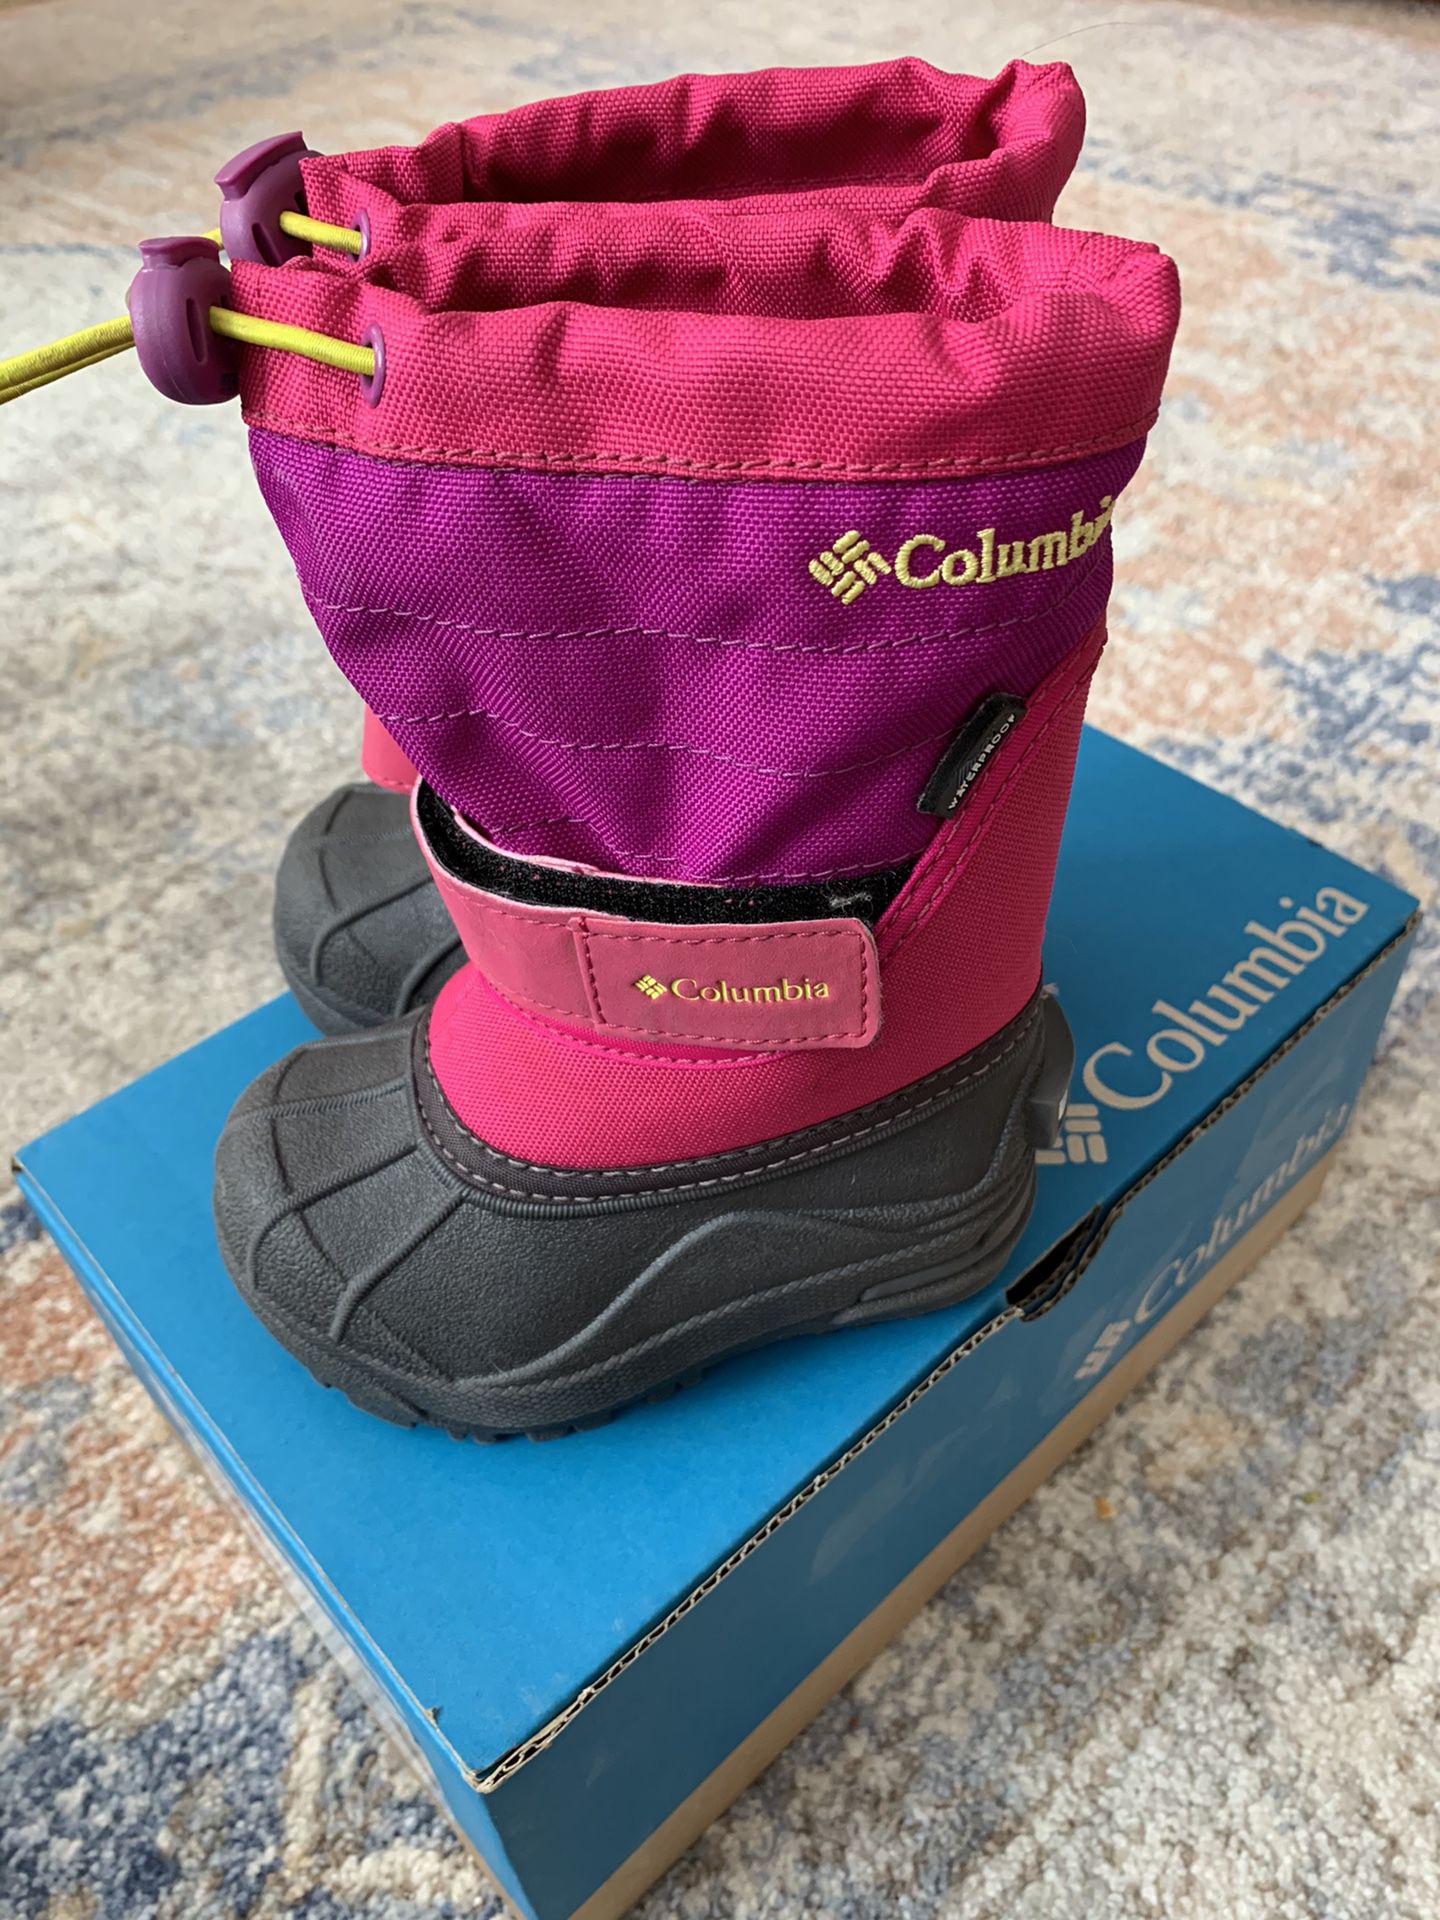 Kids new Columbia snow boots size 6